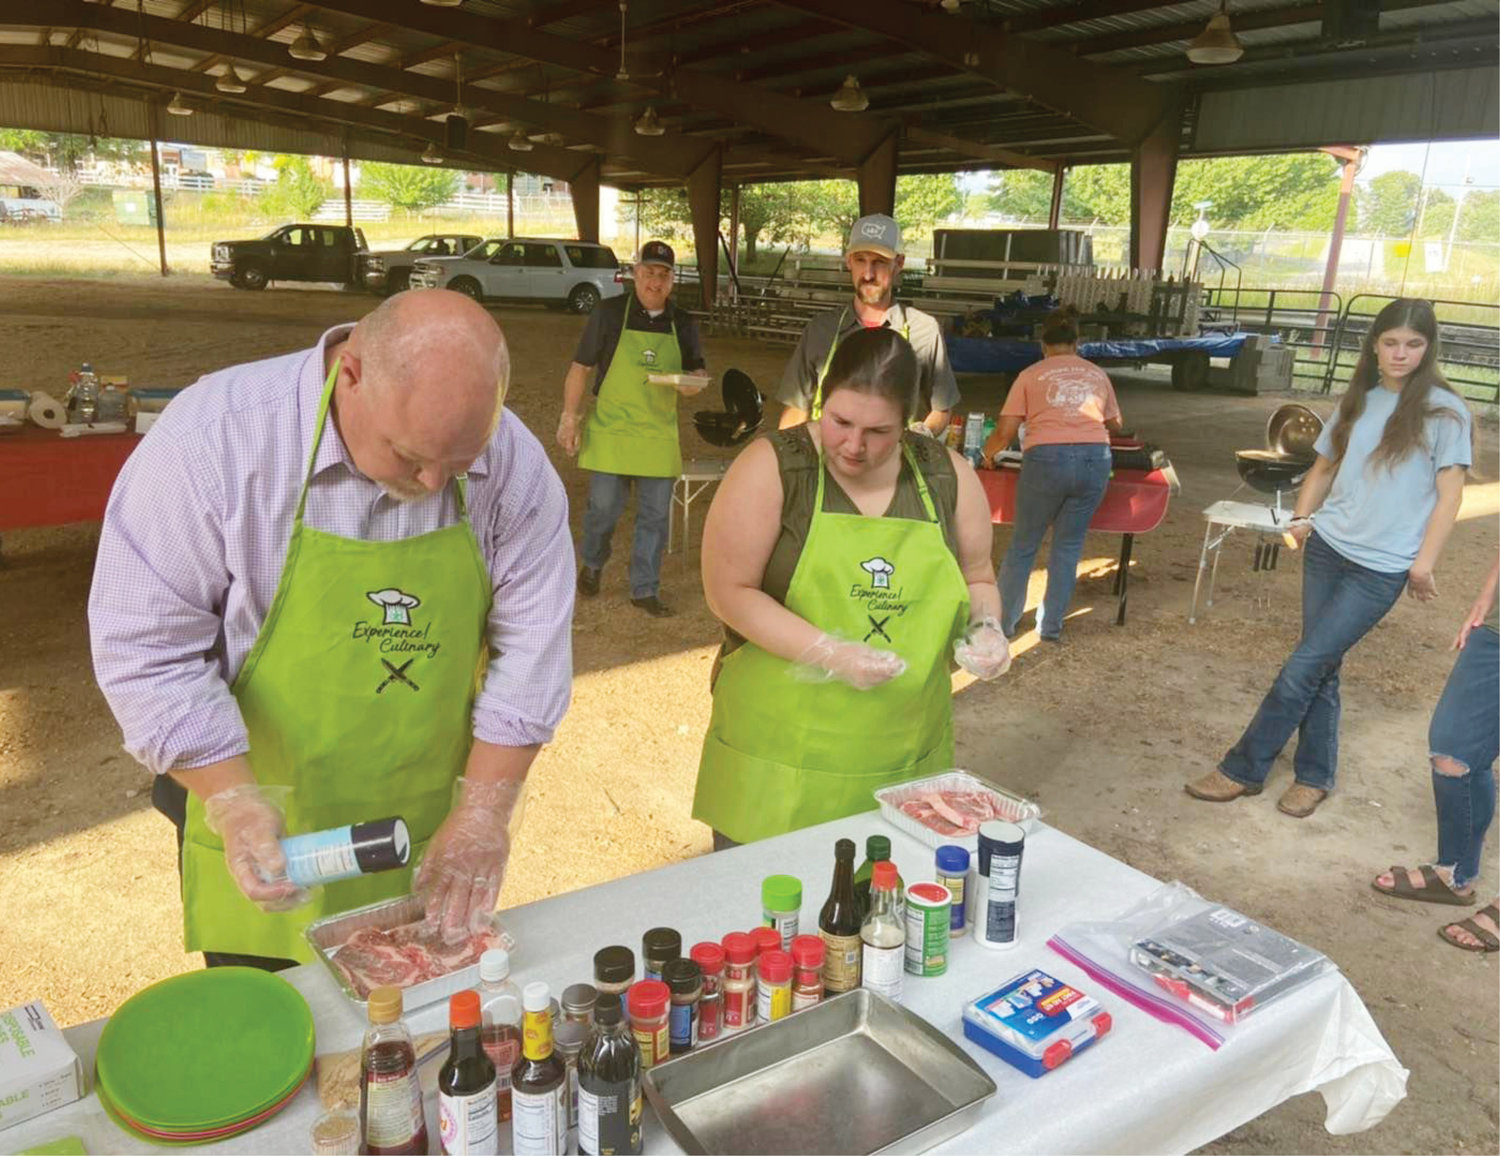 After the smoke cleared, the panel of judges selected Denny Wayne Robinson, White County executive, as the first Grill Master.